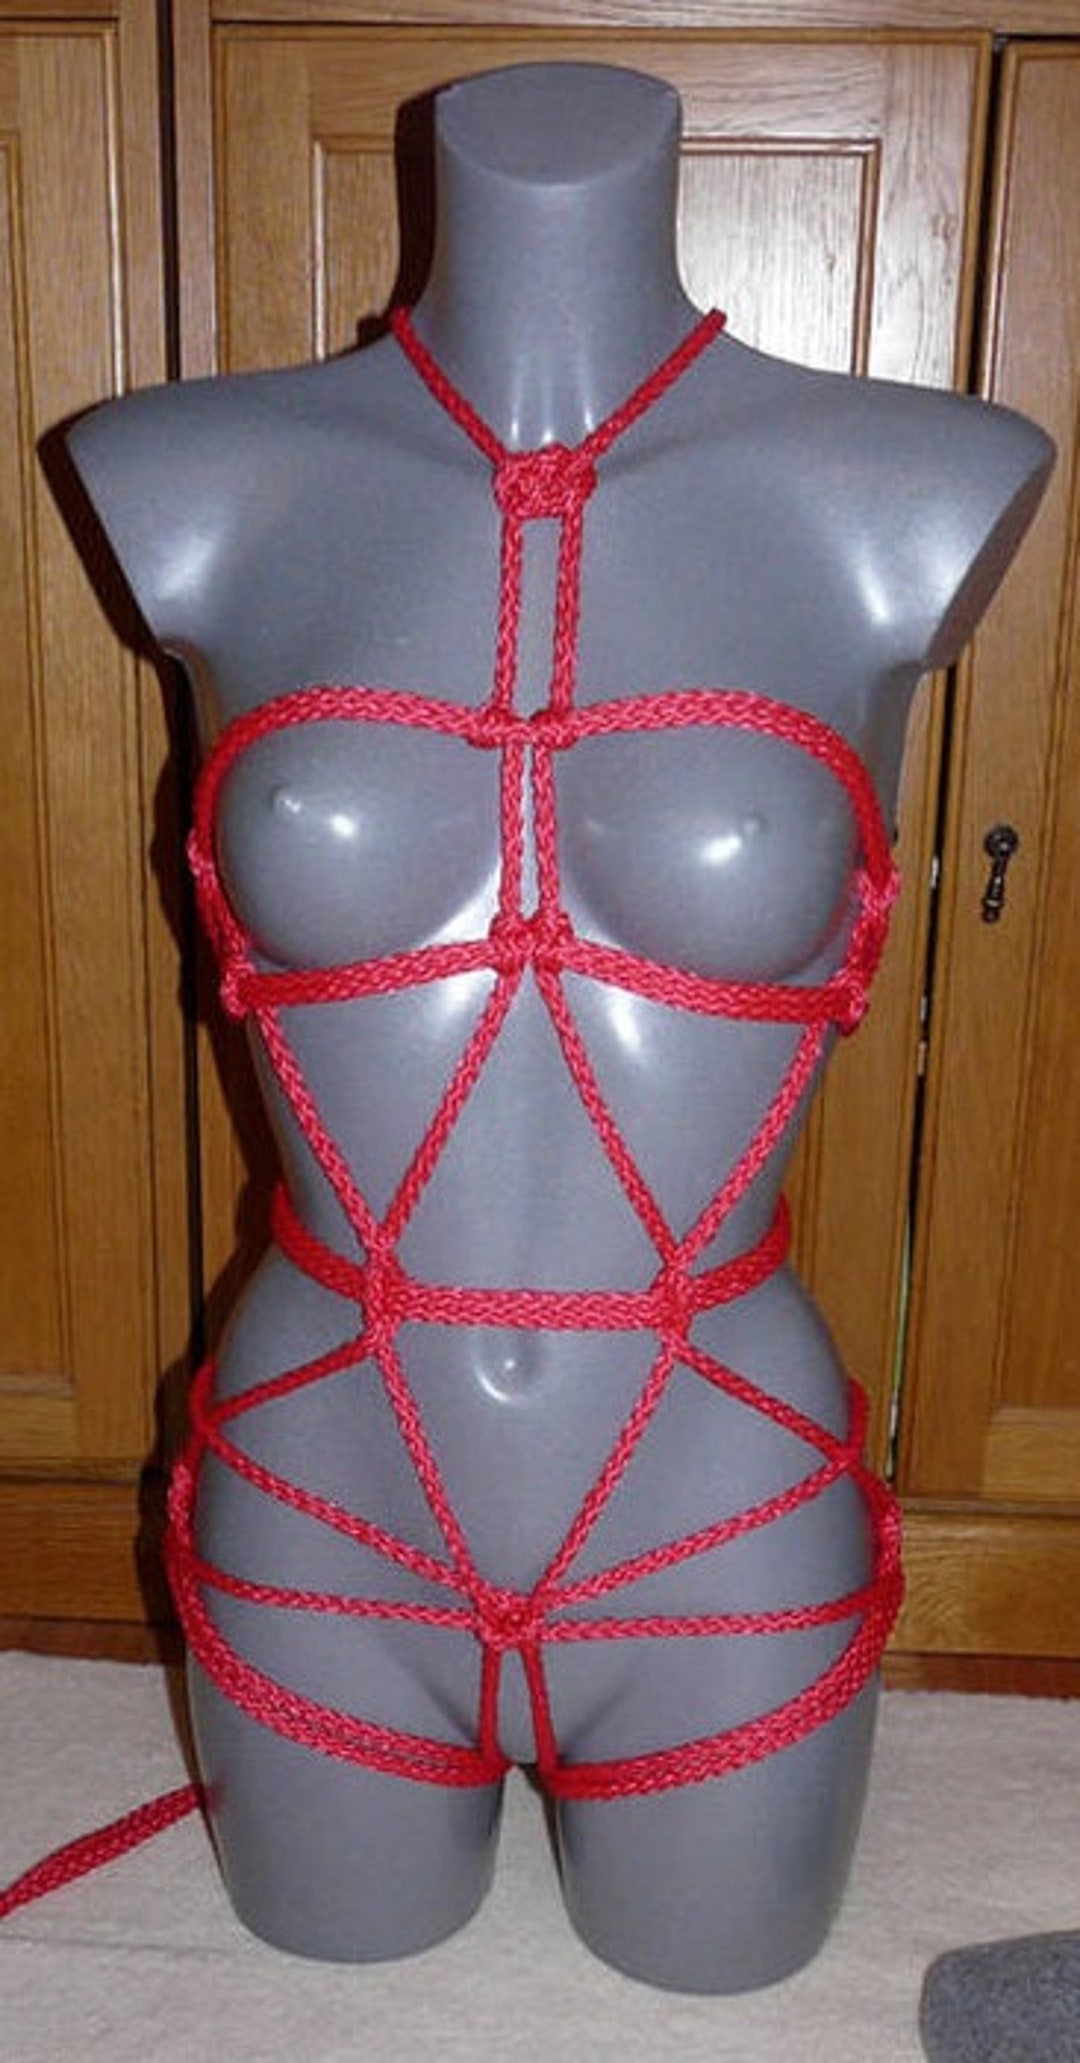 homemade bdsm rope outfit